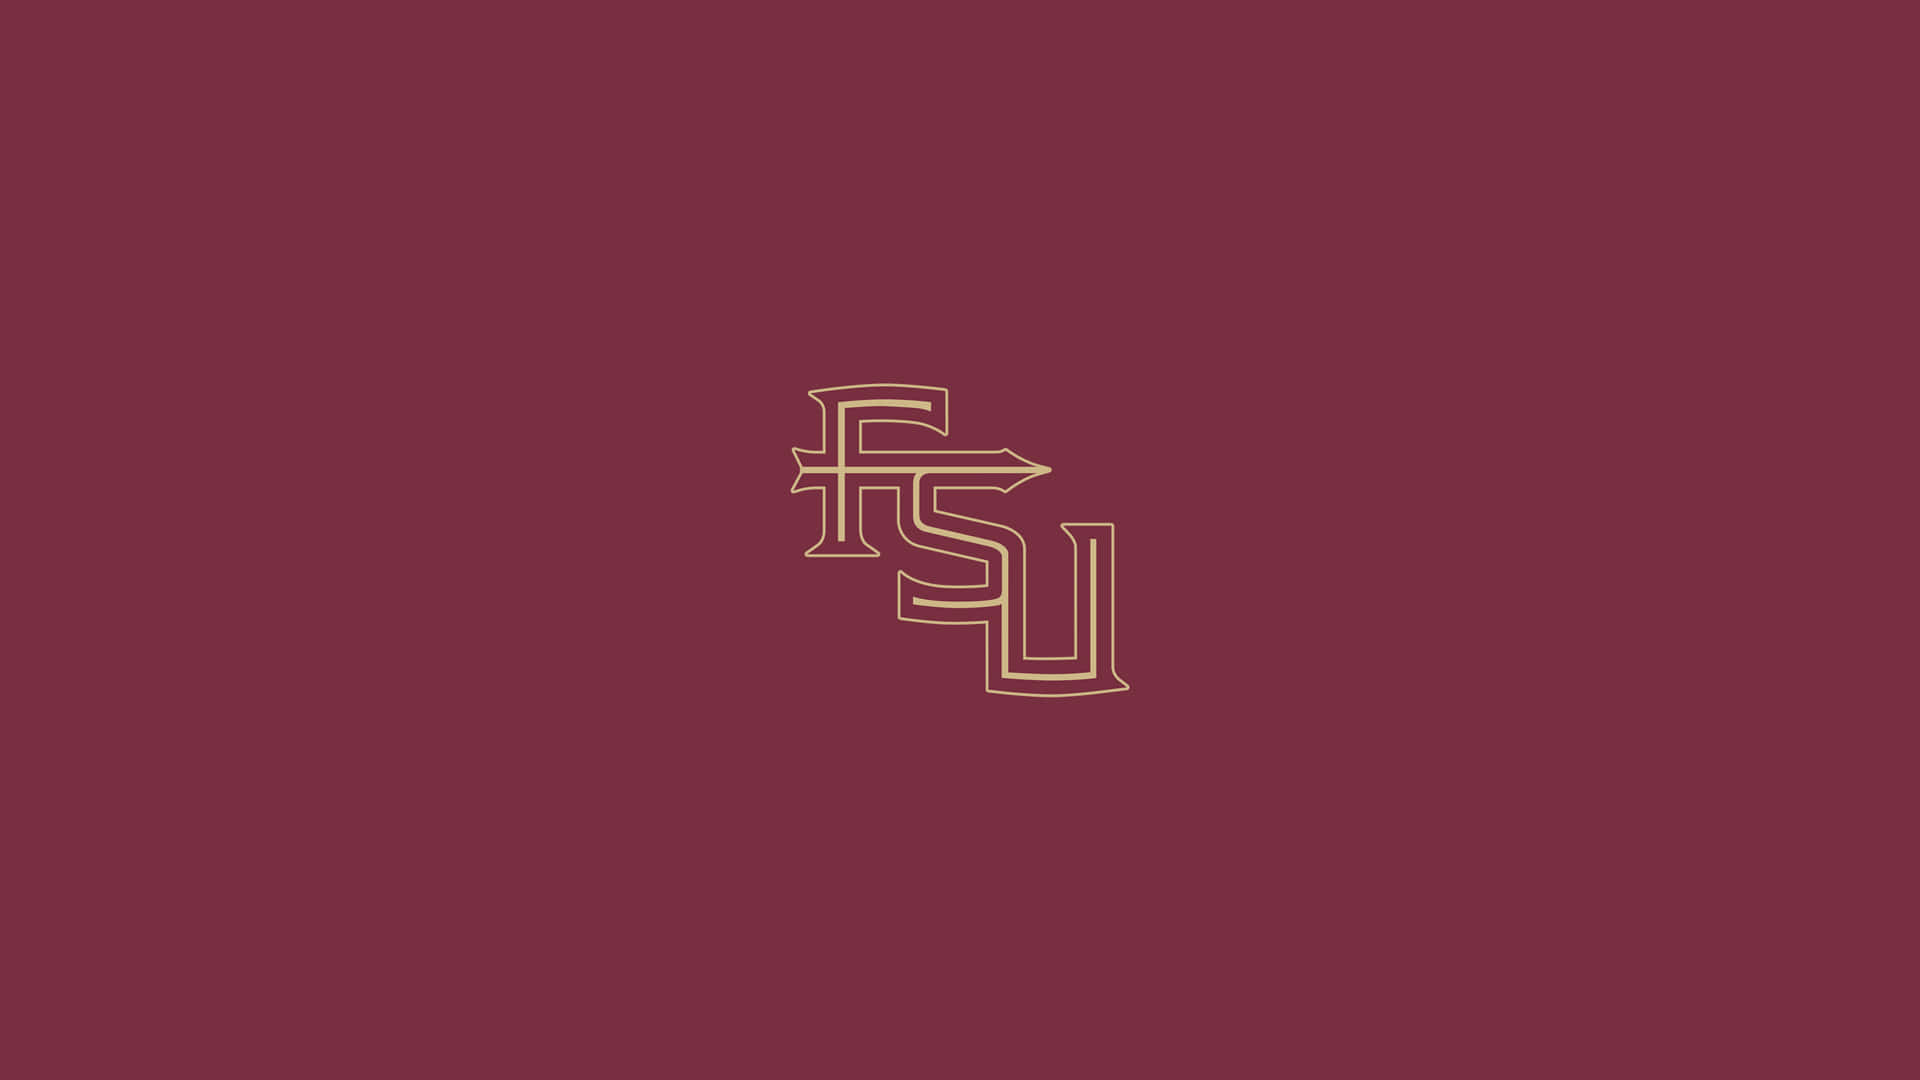 All eyes on the Florida State Seminoles Wallpaper